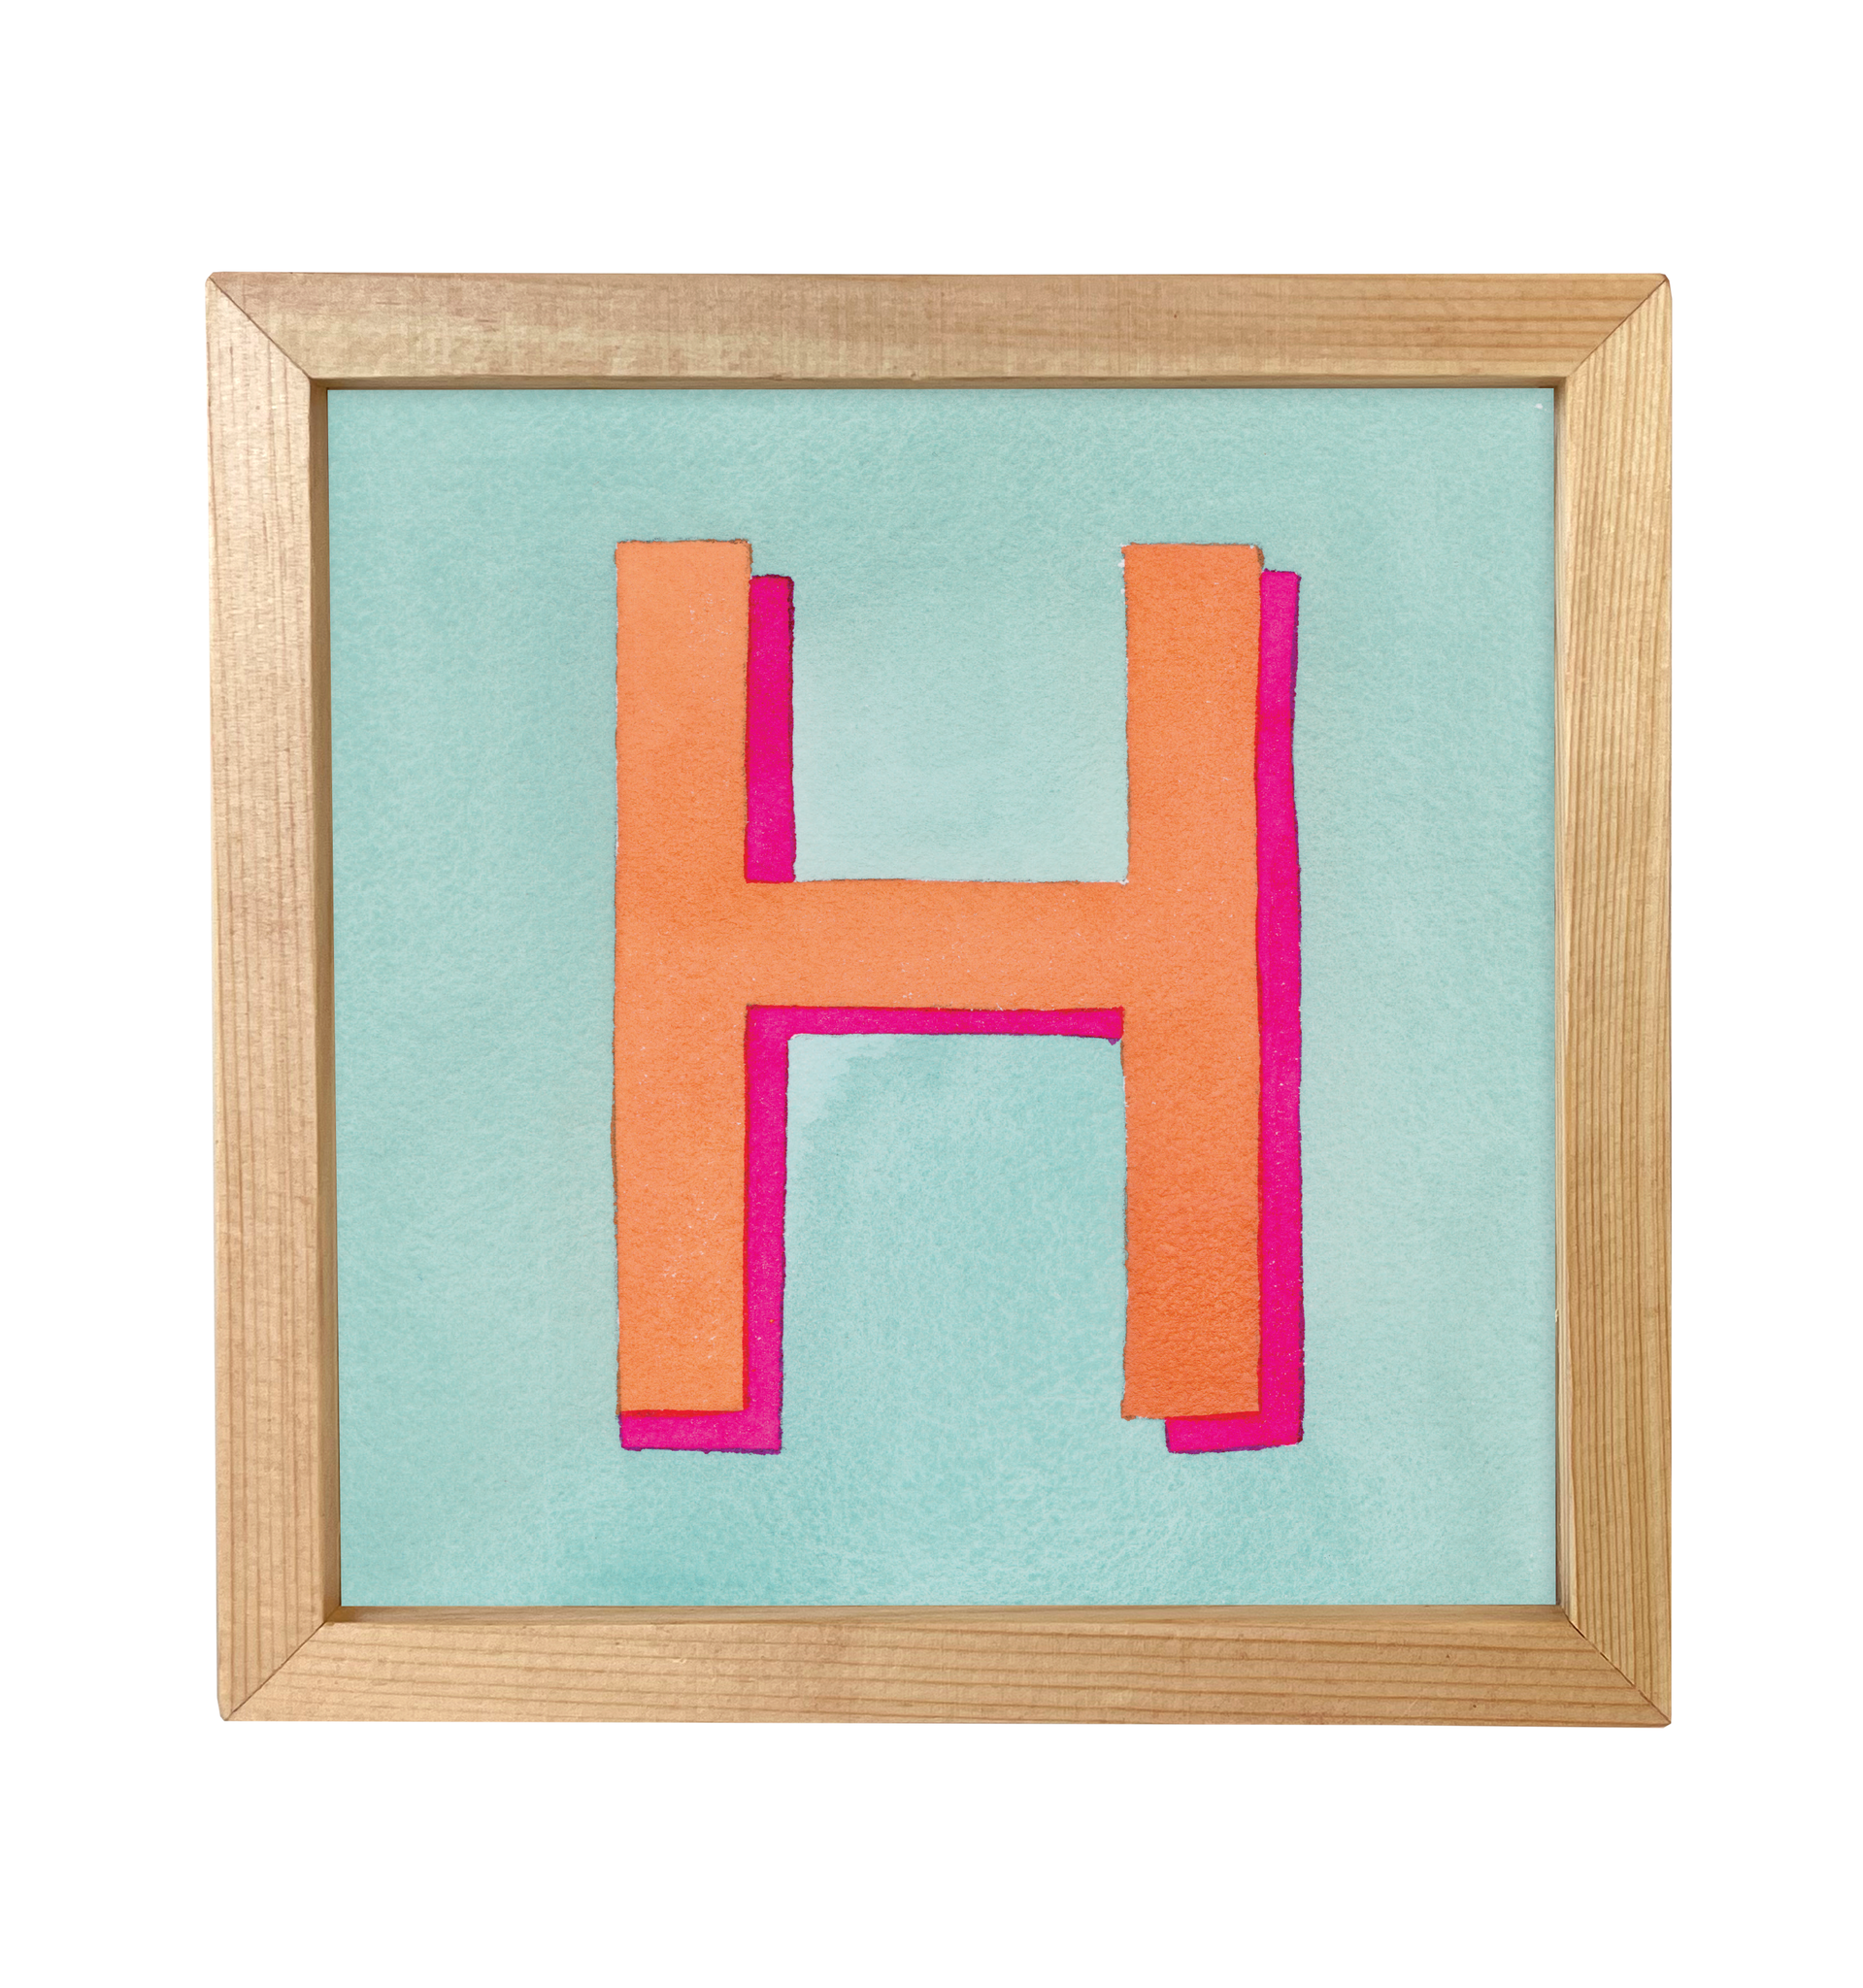 H is for... Little Print